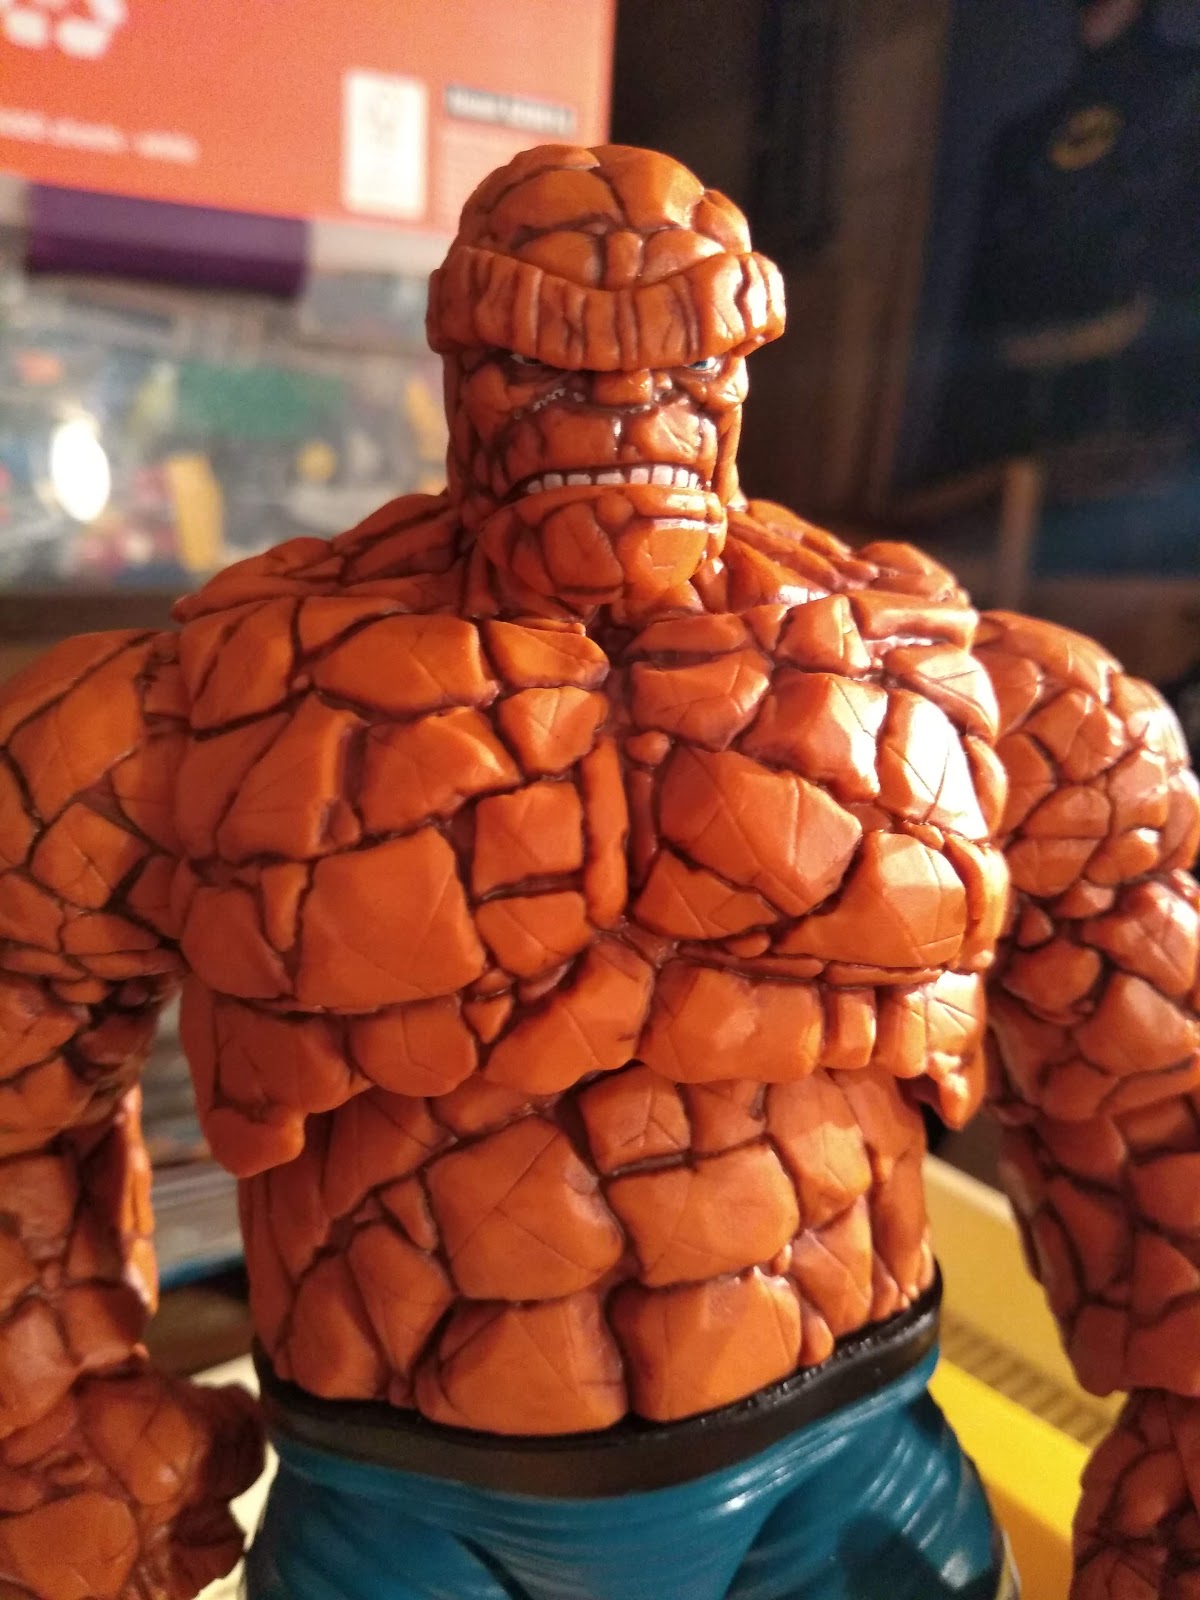 the thing marvel legends walgreens